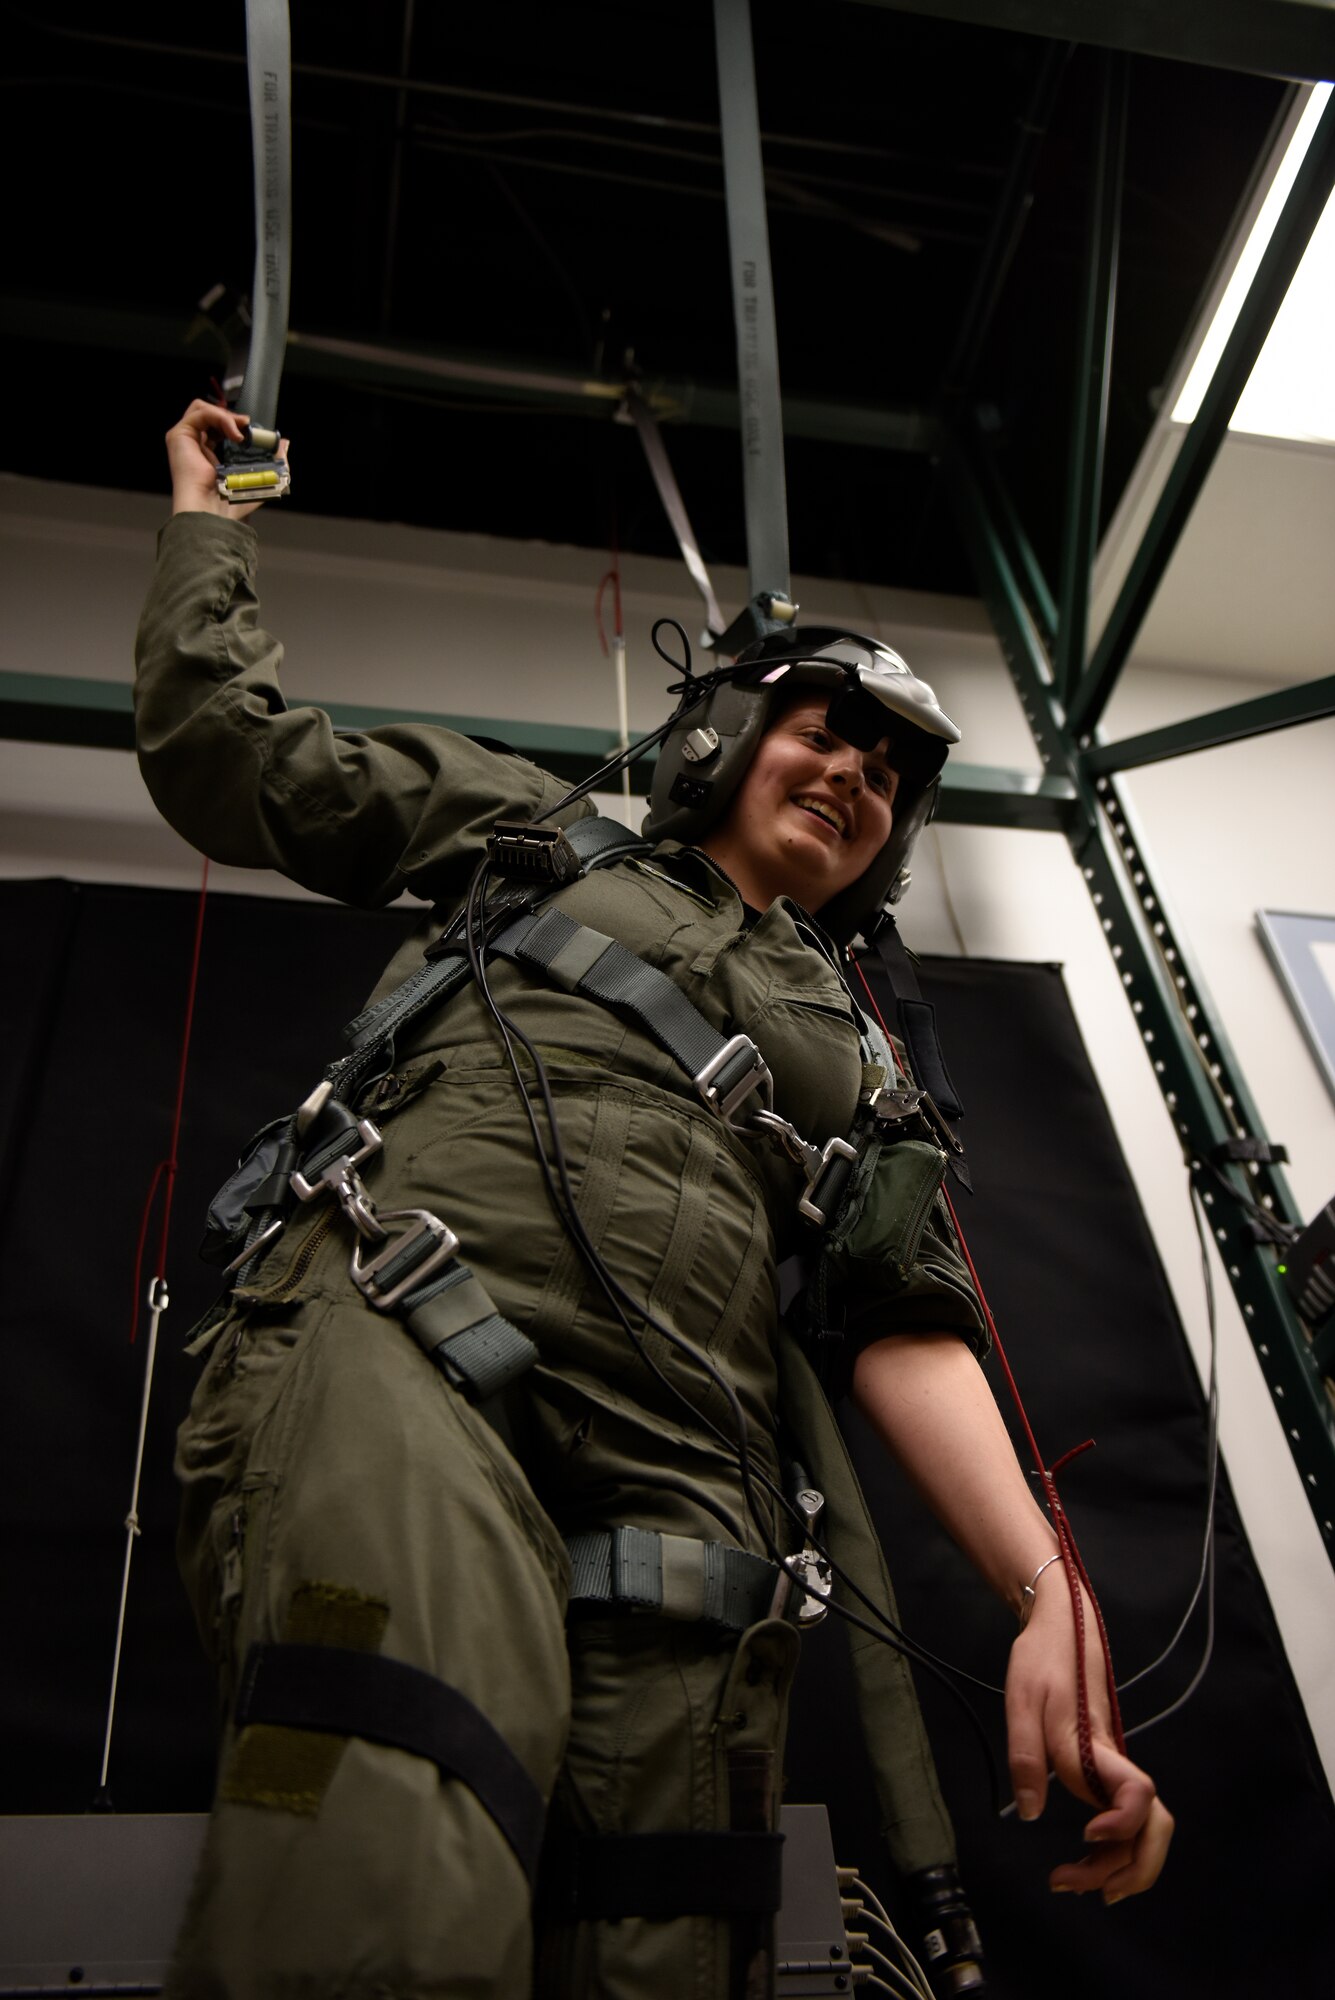 Honorary 2nd Lt. Ashleigh Hunt trains in a parachute simulator May 26, 2016 during Pilot for a Day, a program supporting children and young adults who live with chronic or life-threatening illnesses. Hunt, who was diagnosed with osteosarcoma at 19, was honored during the first-ever Pilot for a Day event at the 180th Fighter Wing where she launched an F-16 Fighting Falcon, received a tour of the base facilities, and experienced basic pilot survival training. (U.S. Air National Guard photo by Staff Sgt. Shane Hughes)